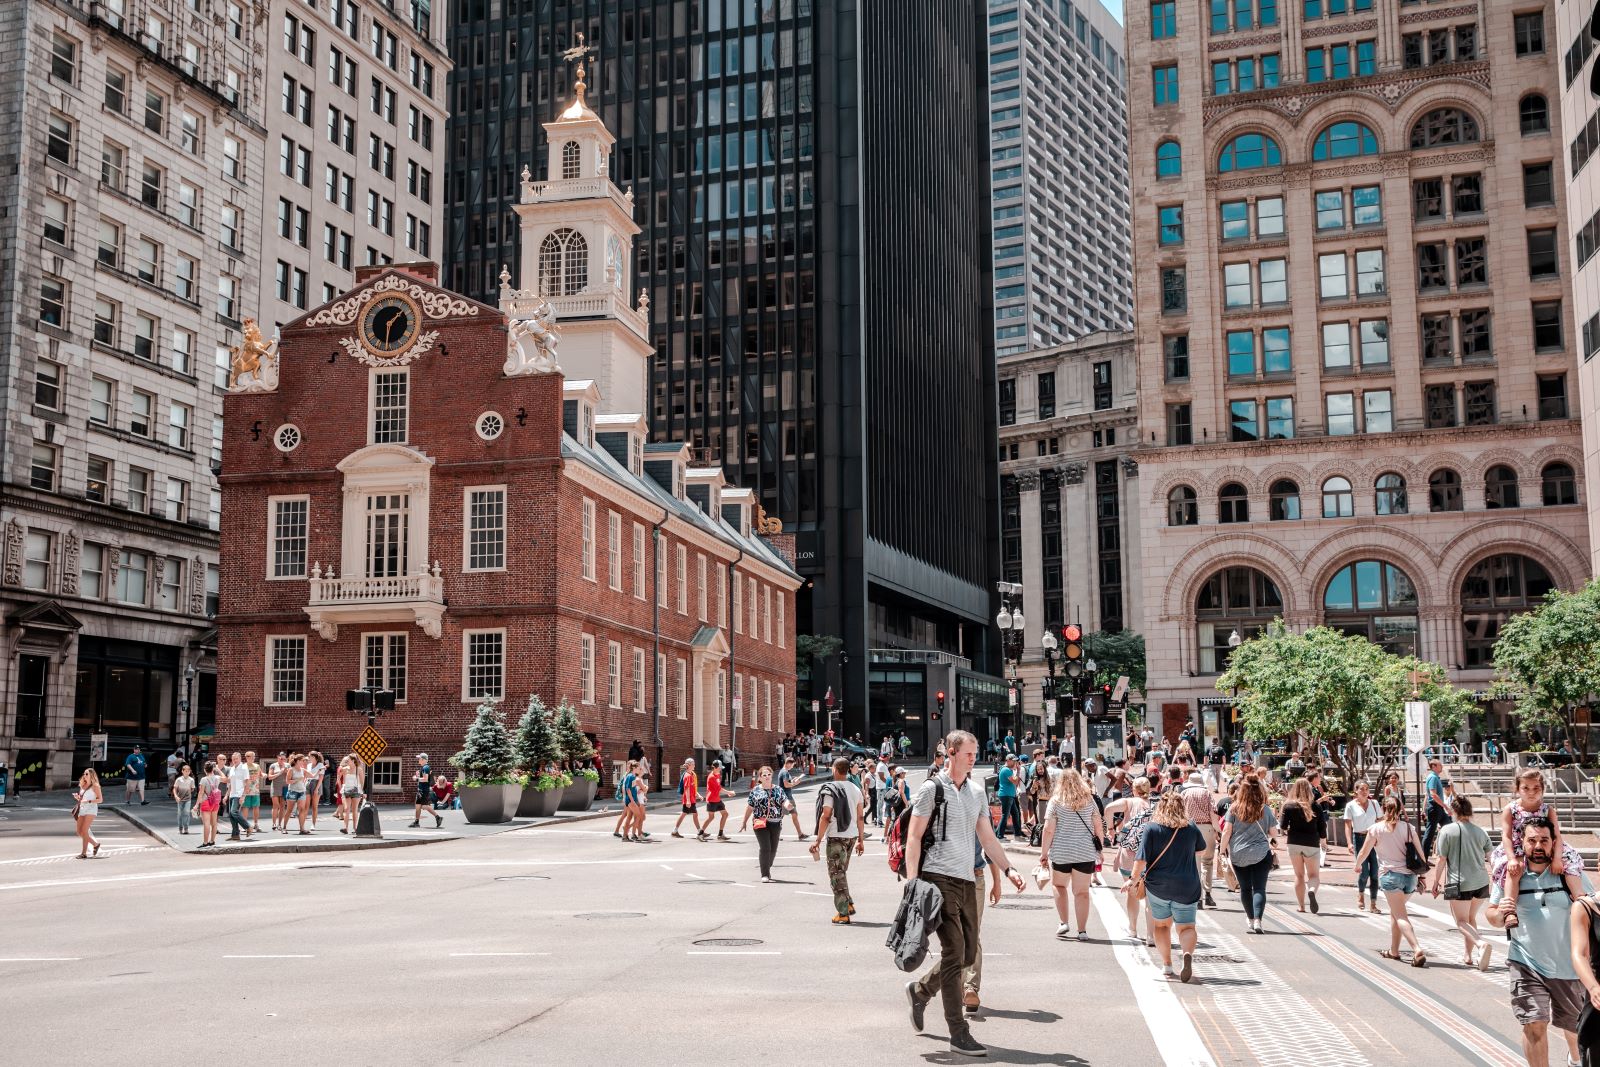 <p class="wp-caption-text">Image credit: Shutterstock / 2p2play</p>  <p>Follow a 2.5-mile route through downtown Boston that leads to 16 historically significant sites, narrating the story of America’s struggle for liberty.</p>